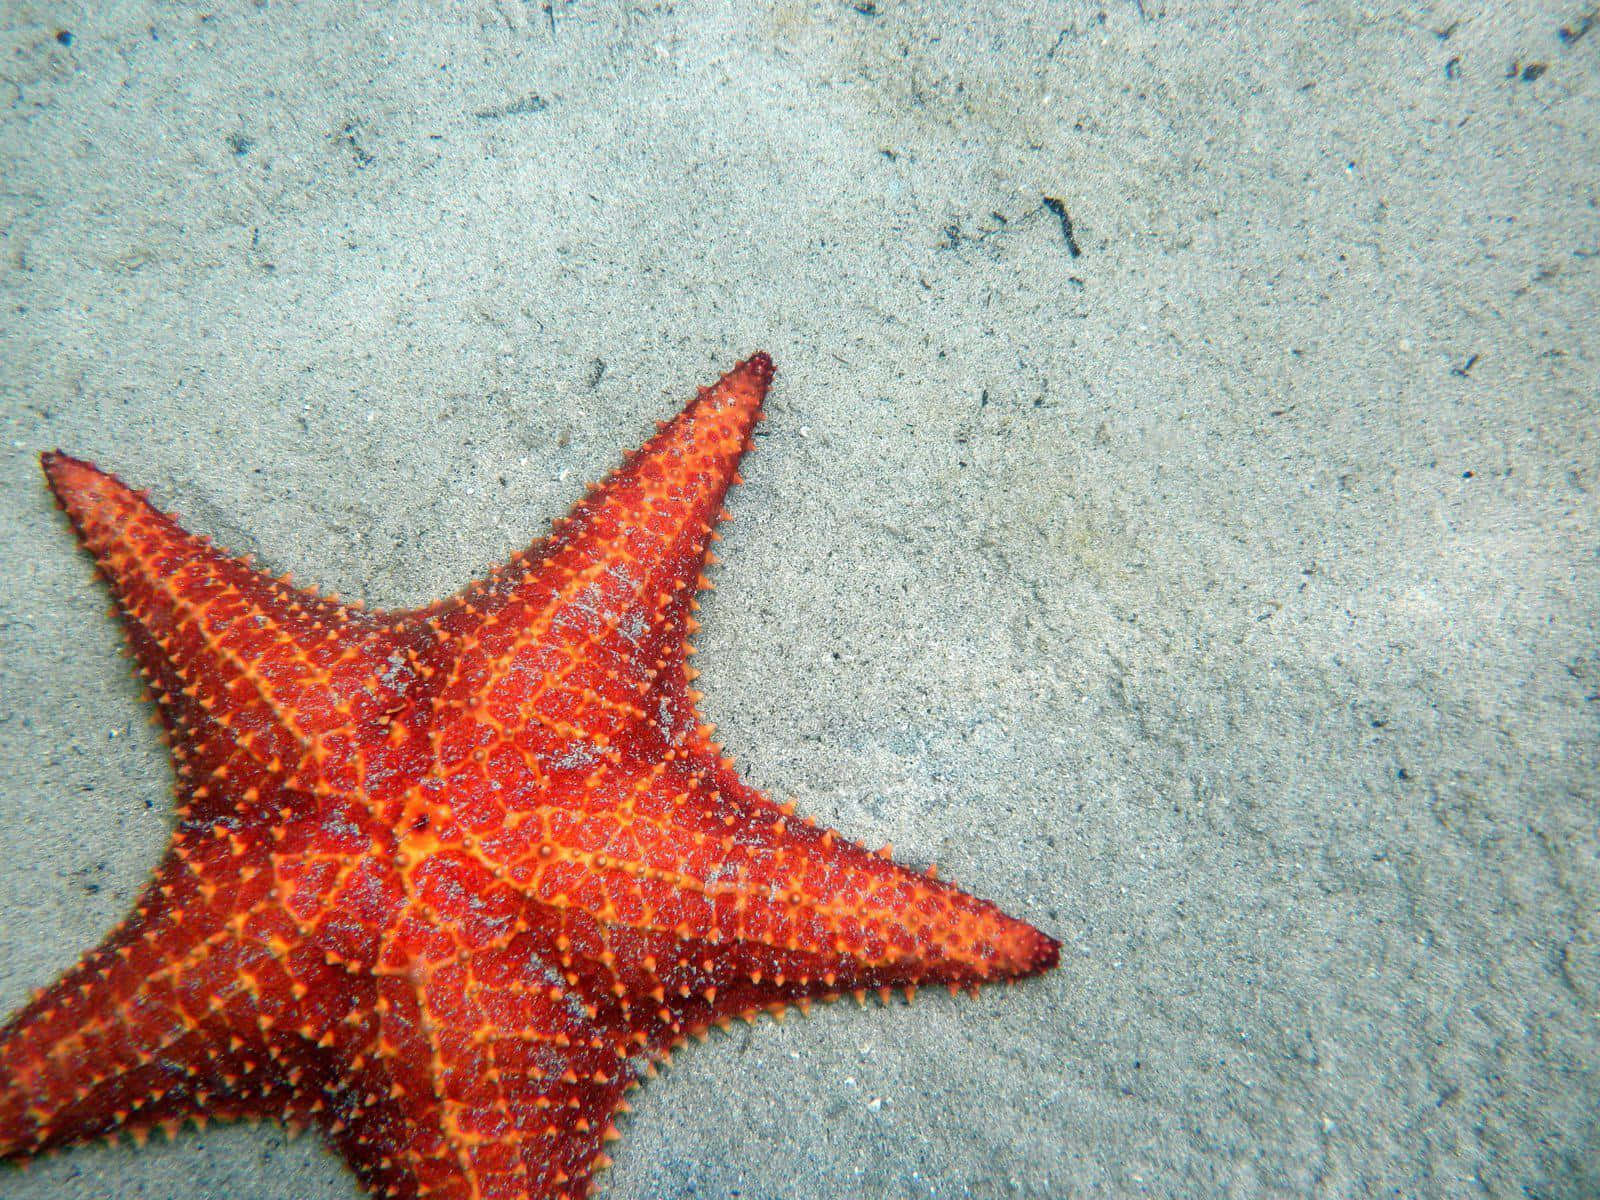 A Starfish on the Rocky Shore